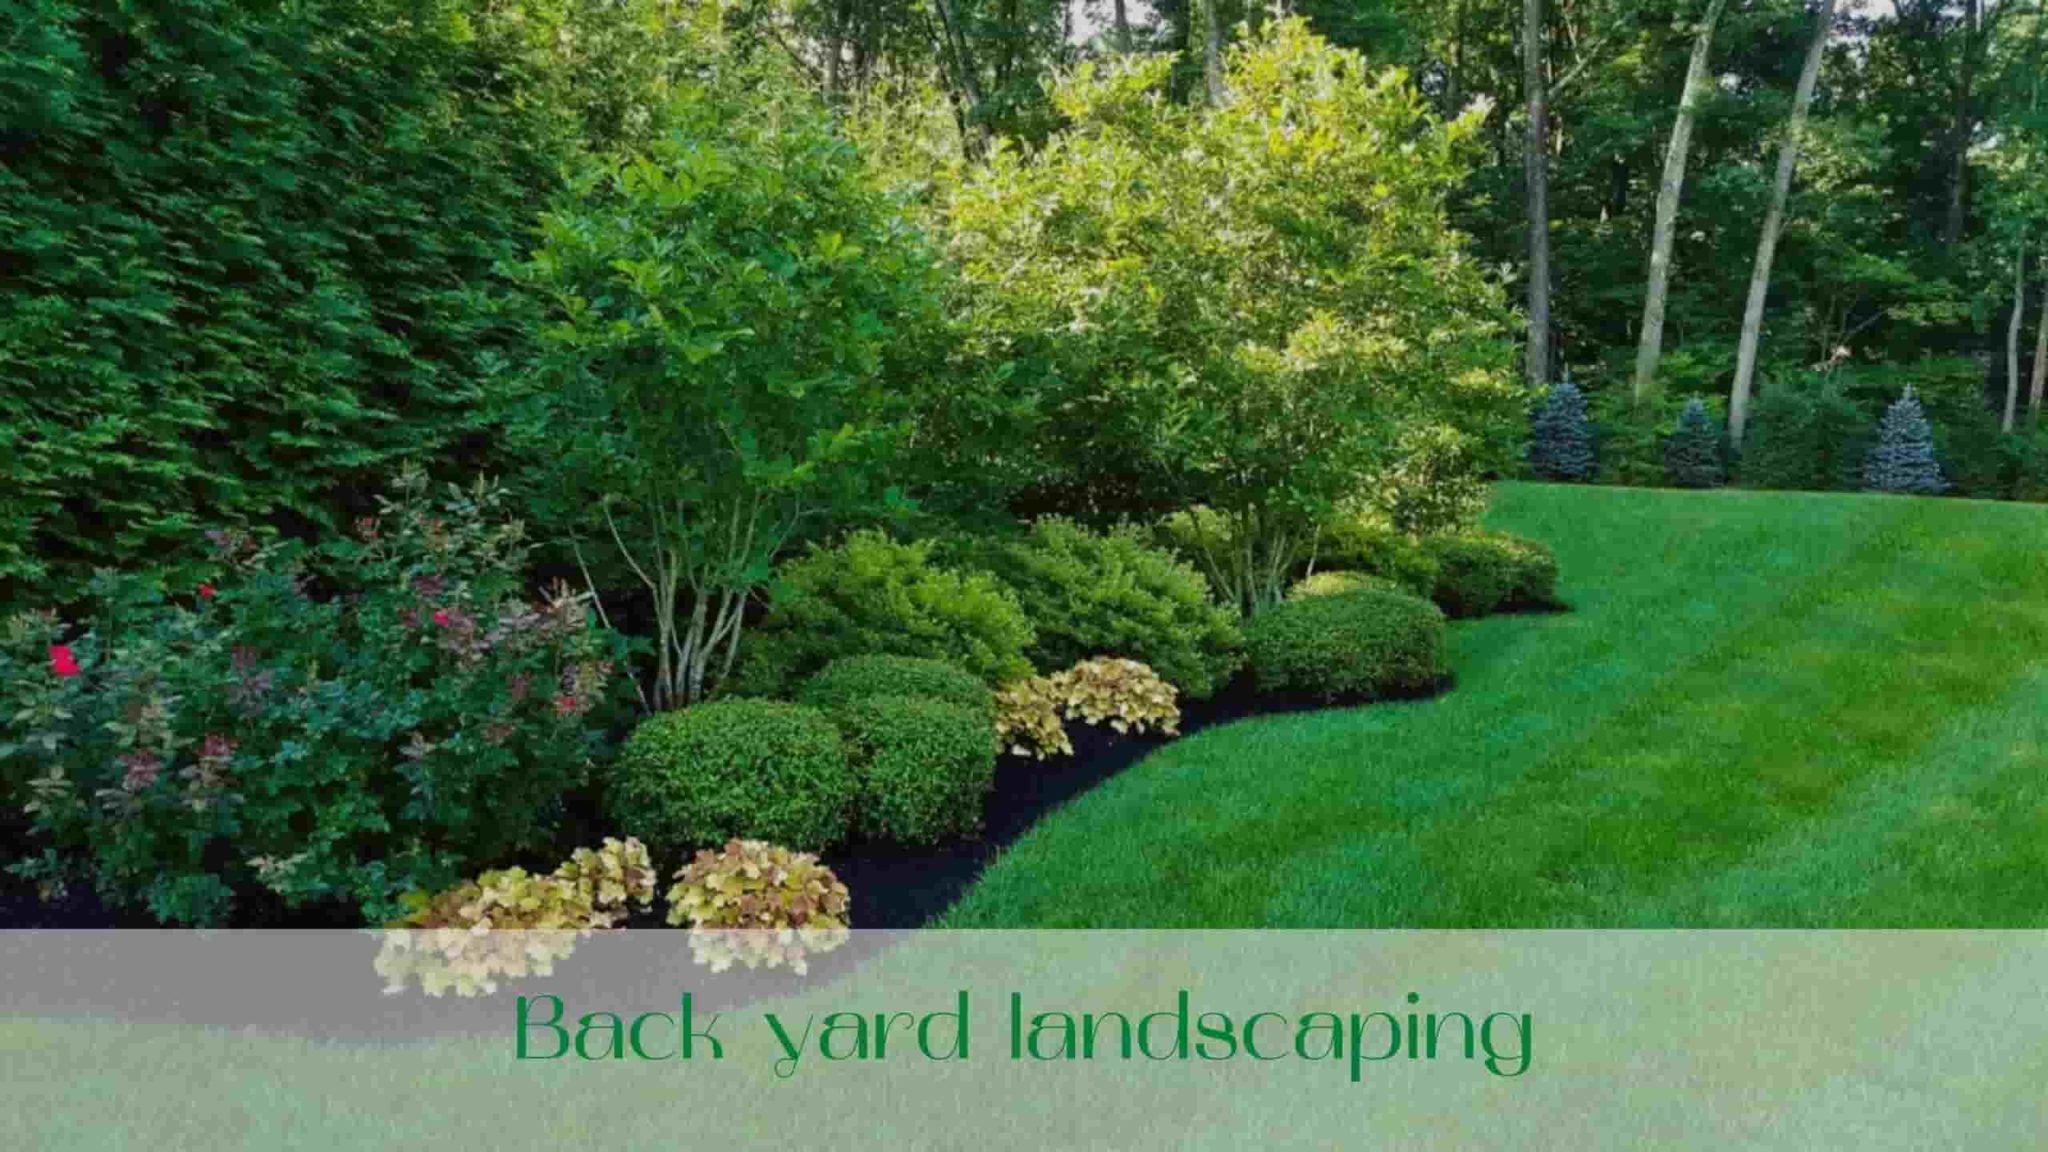 Full service landscaping in Toronto | Best company in 2021